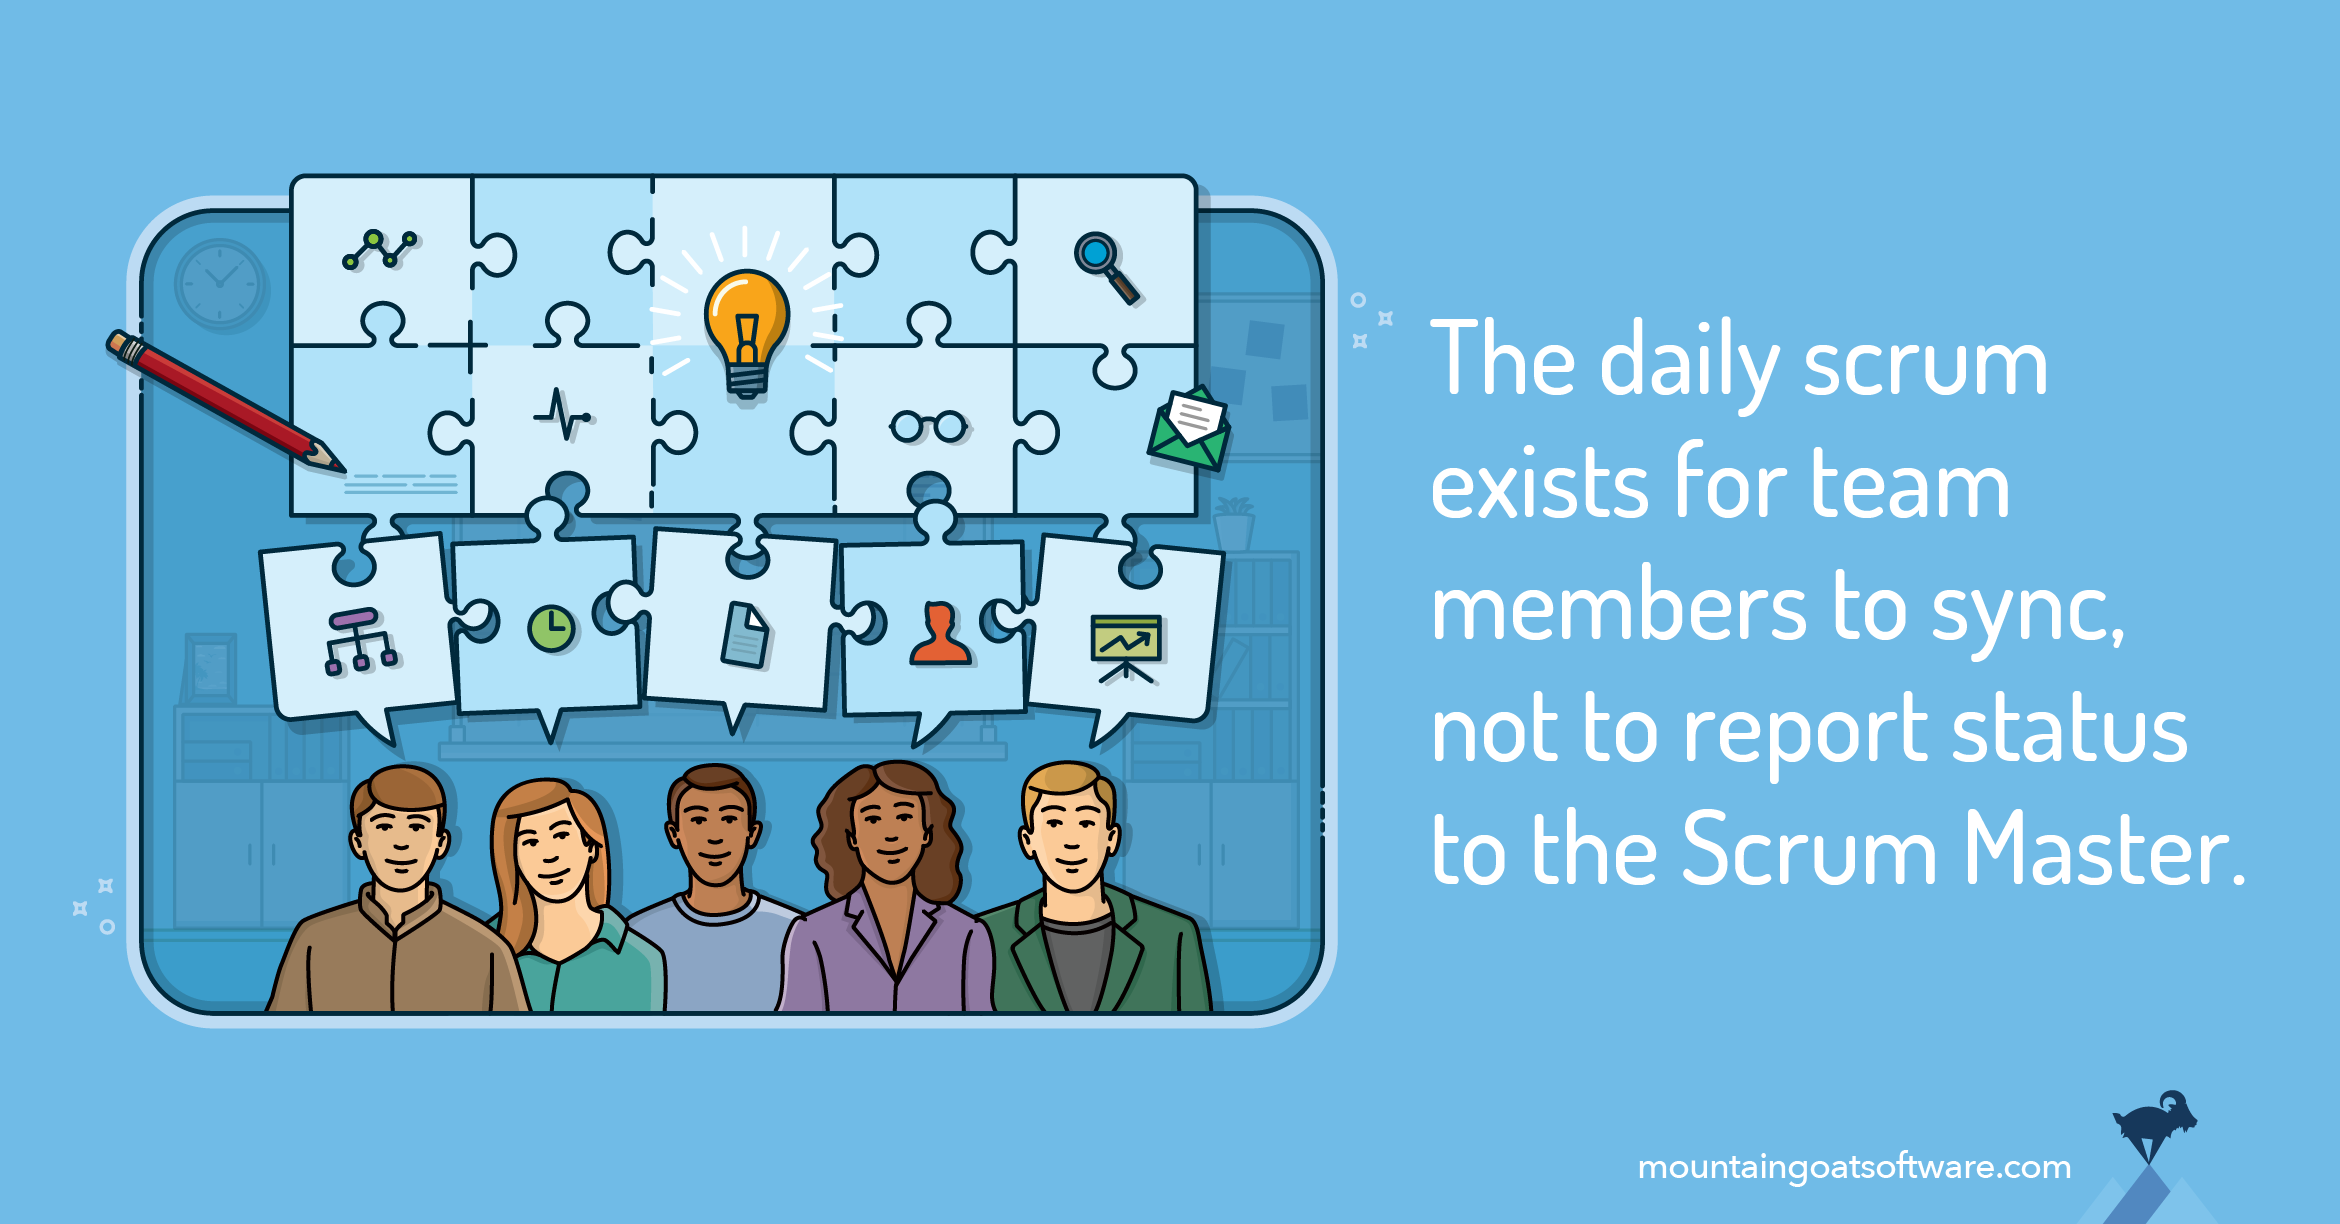 Each team member brings a piece of the sprint puzzle to each daily scrum. By syncing the pieces, the team sees a full picture of how the sprint is going. The daily scrum exists for team members to sync, not to report status to the Scrum Master.